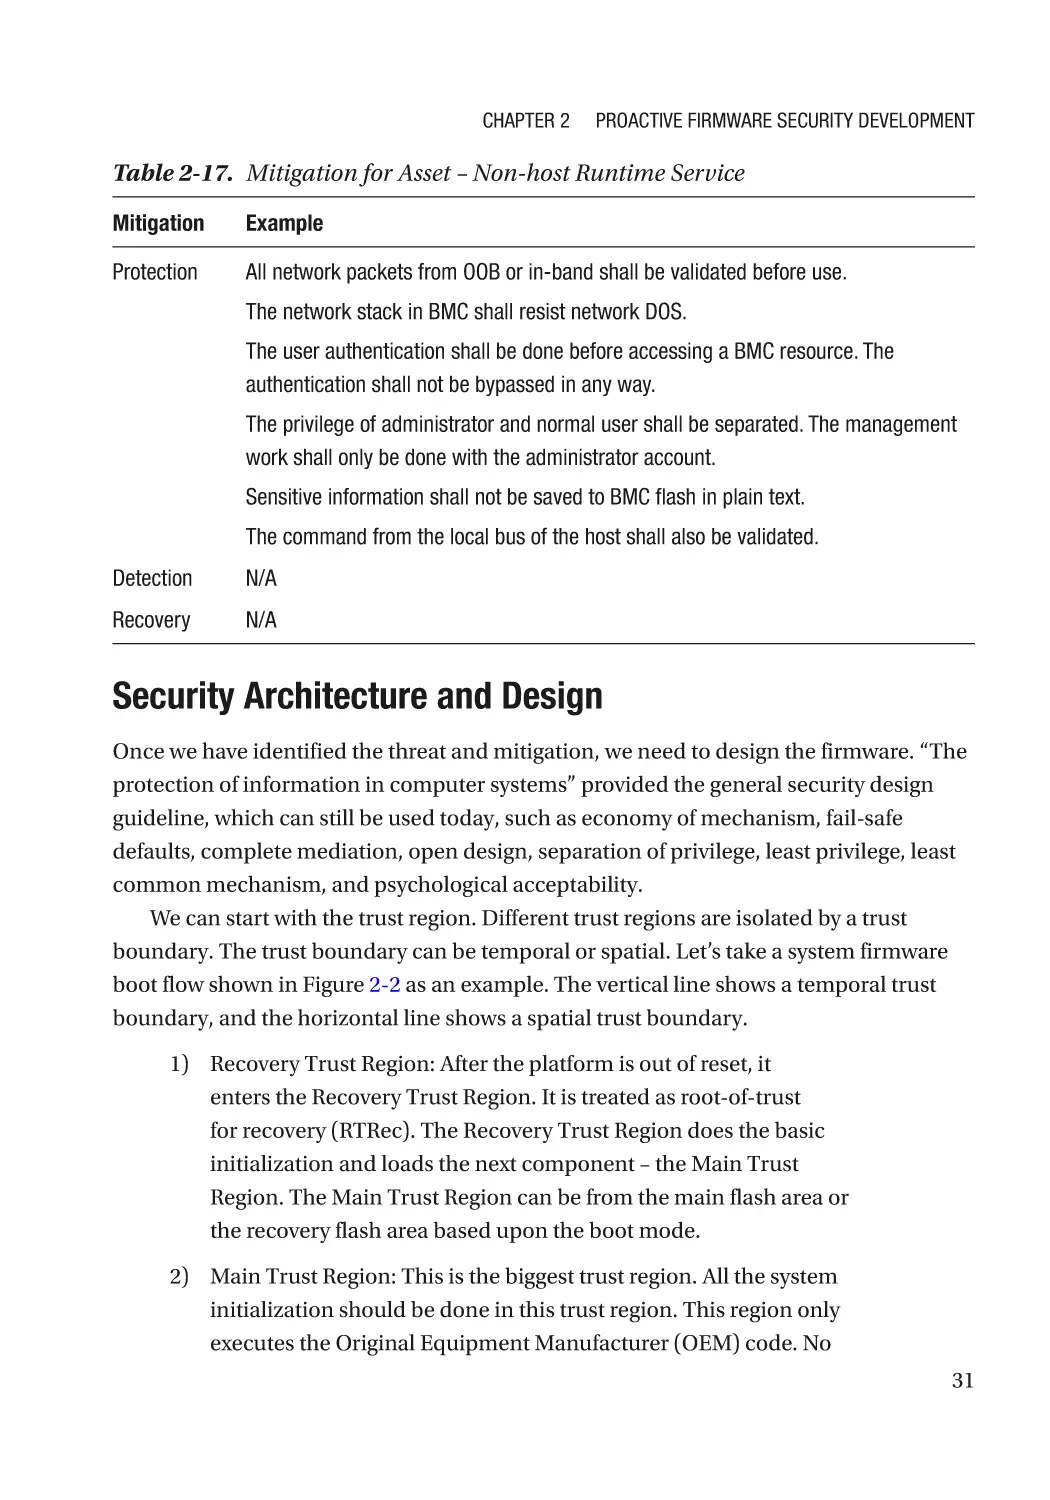 Security Architecture and Design